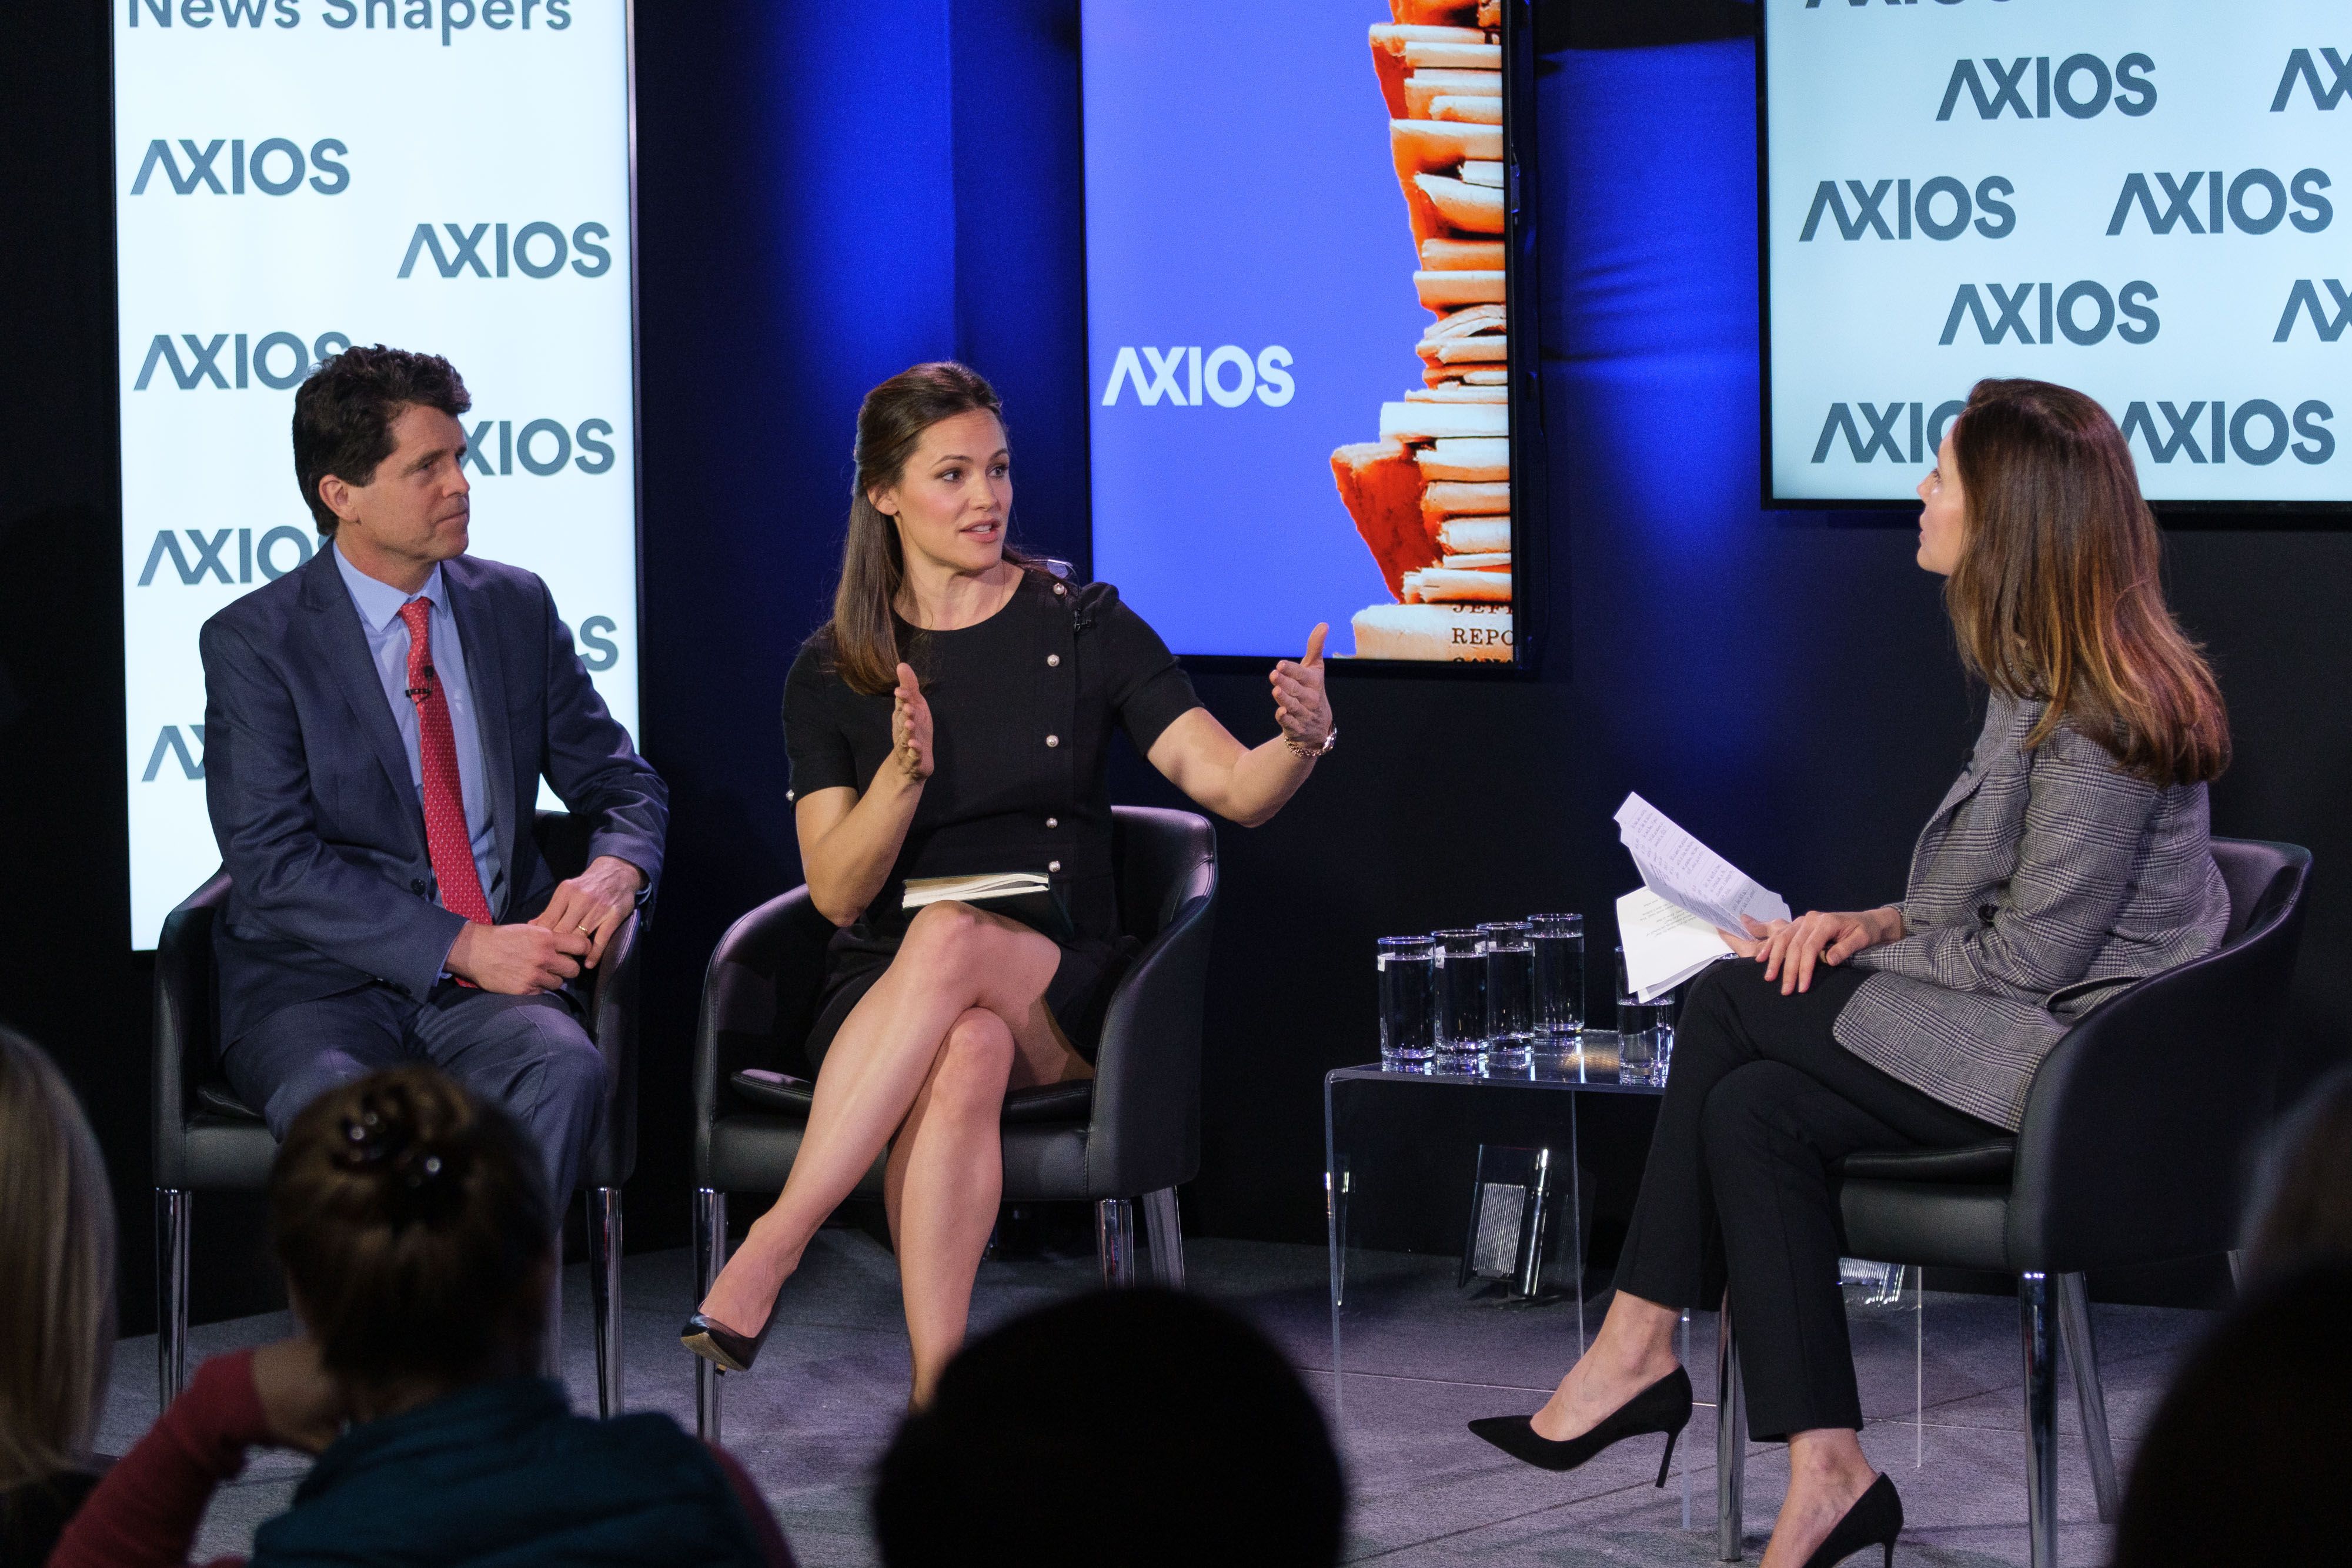 Save the Children's Mark Shriver and Jennifer Garner in conversation with Axios Executive Vice President Evan Ryan